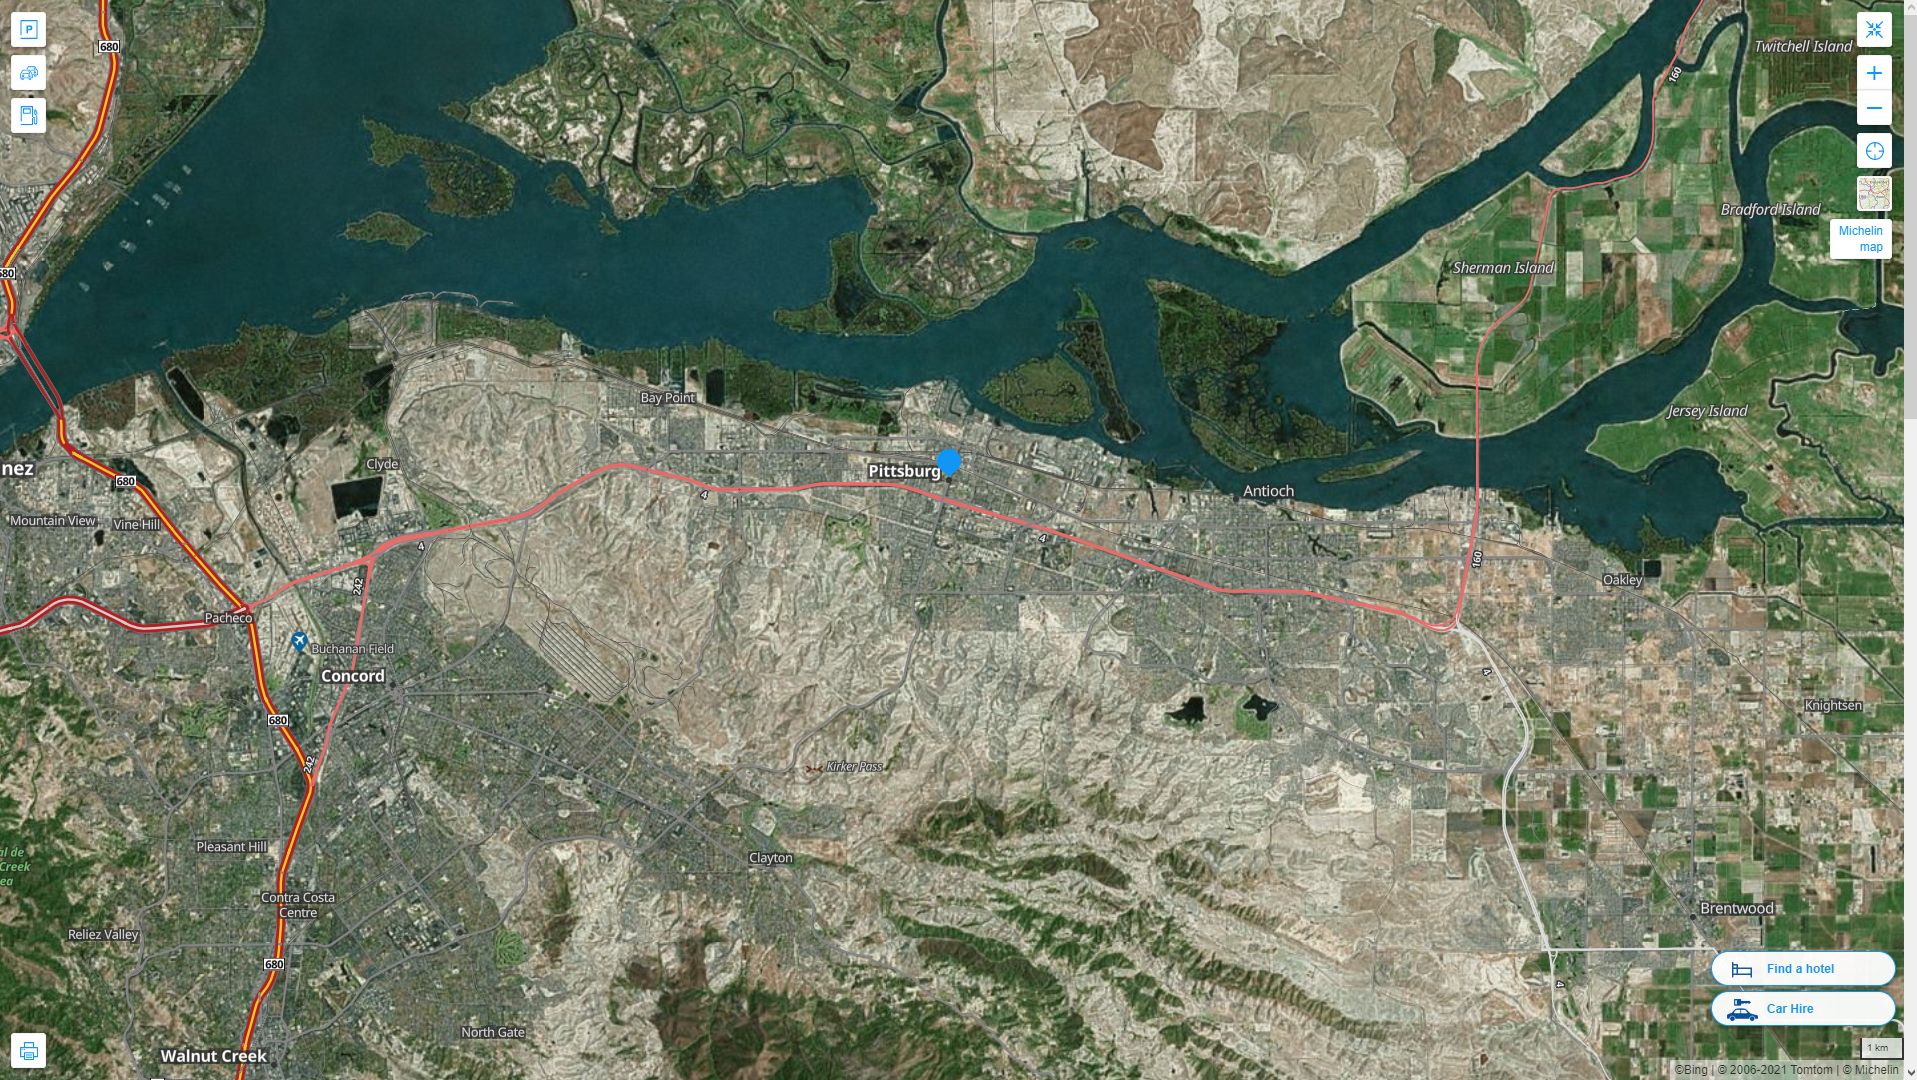 Pittsburg California Highway and Road Map with Satellite View